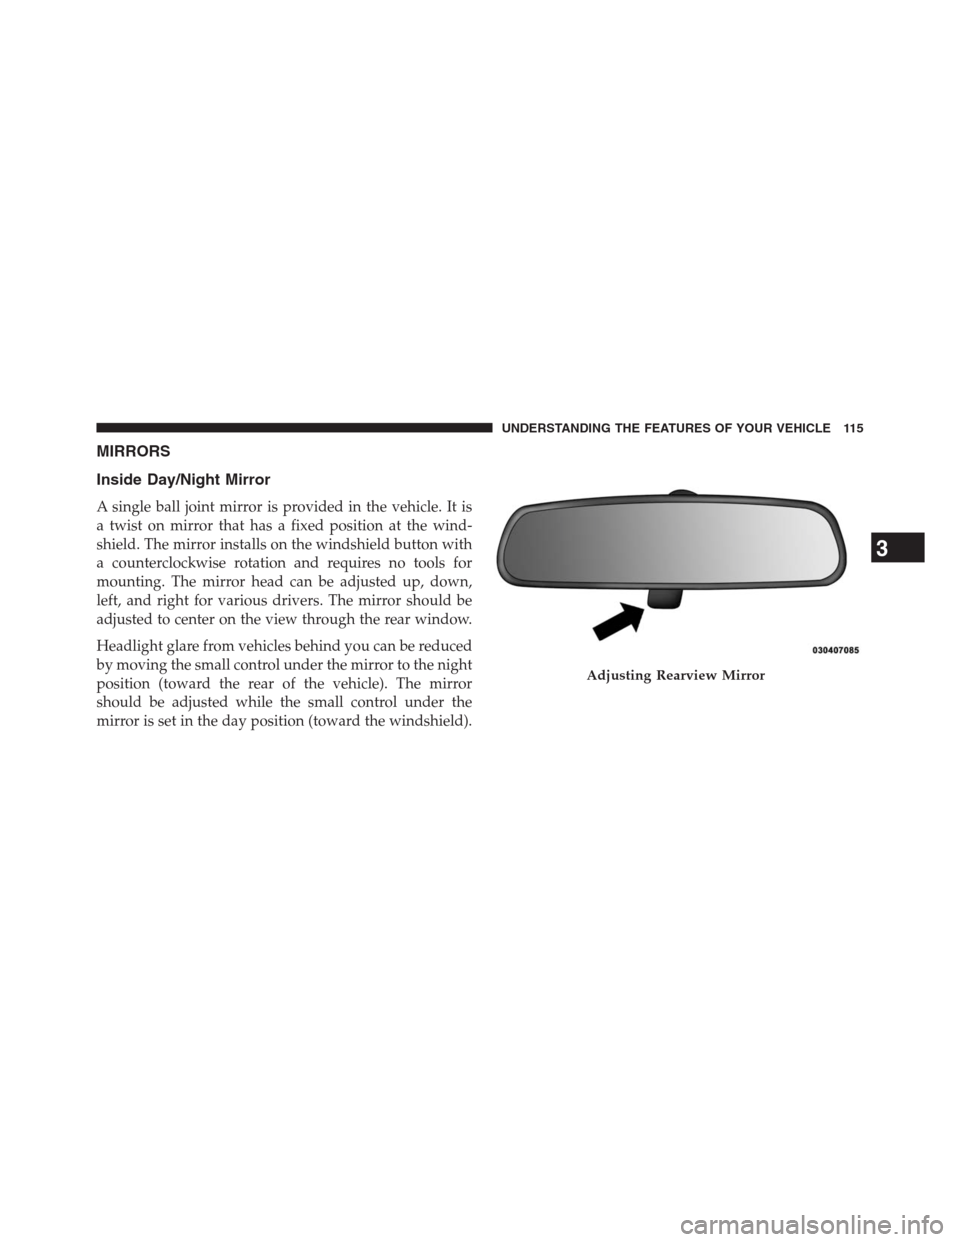 DODGE JOURNEY 2013 1.G Owners Manual MIRRORS
Inside Day/Night Mirror
A single ball joint mirror is provided in the vehicle. It is
a twist on mirror that has a fixed position at the wind-
shield. The mirror installs on the windshield butt